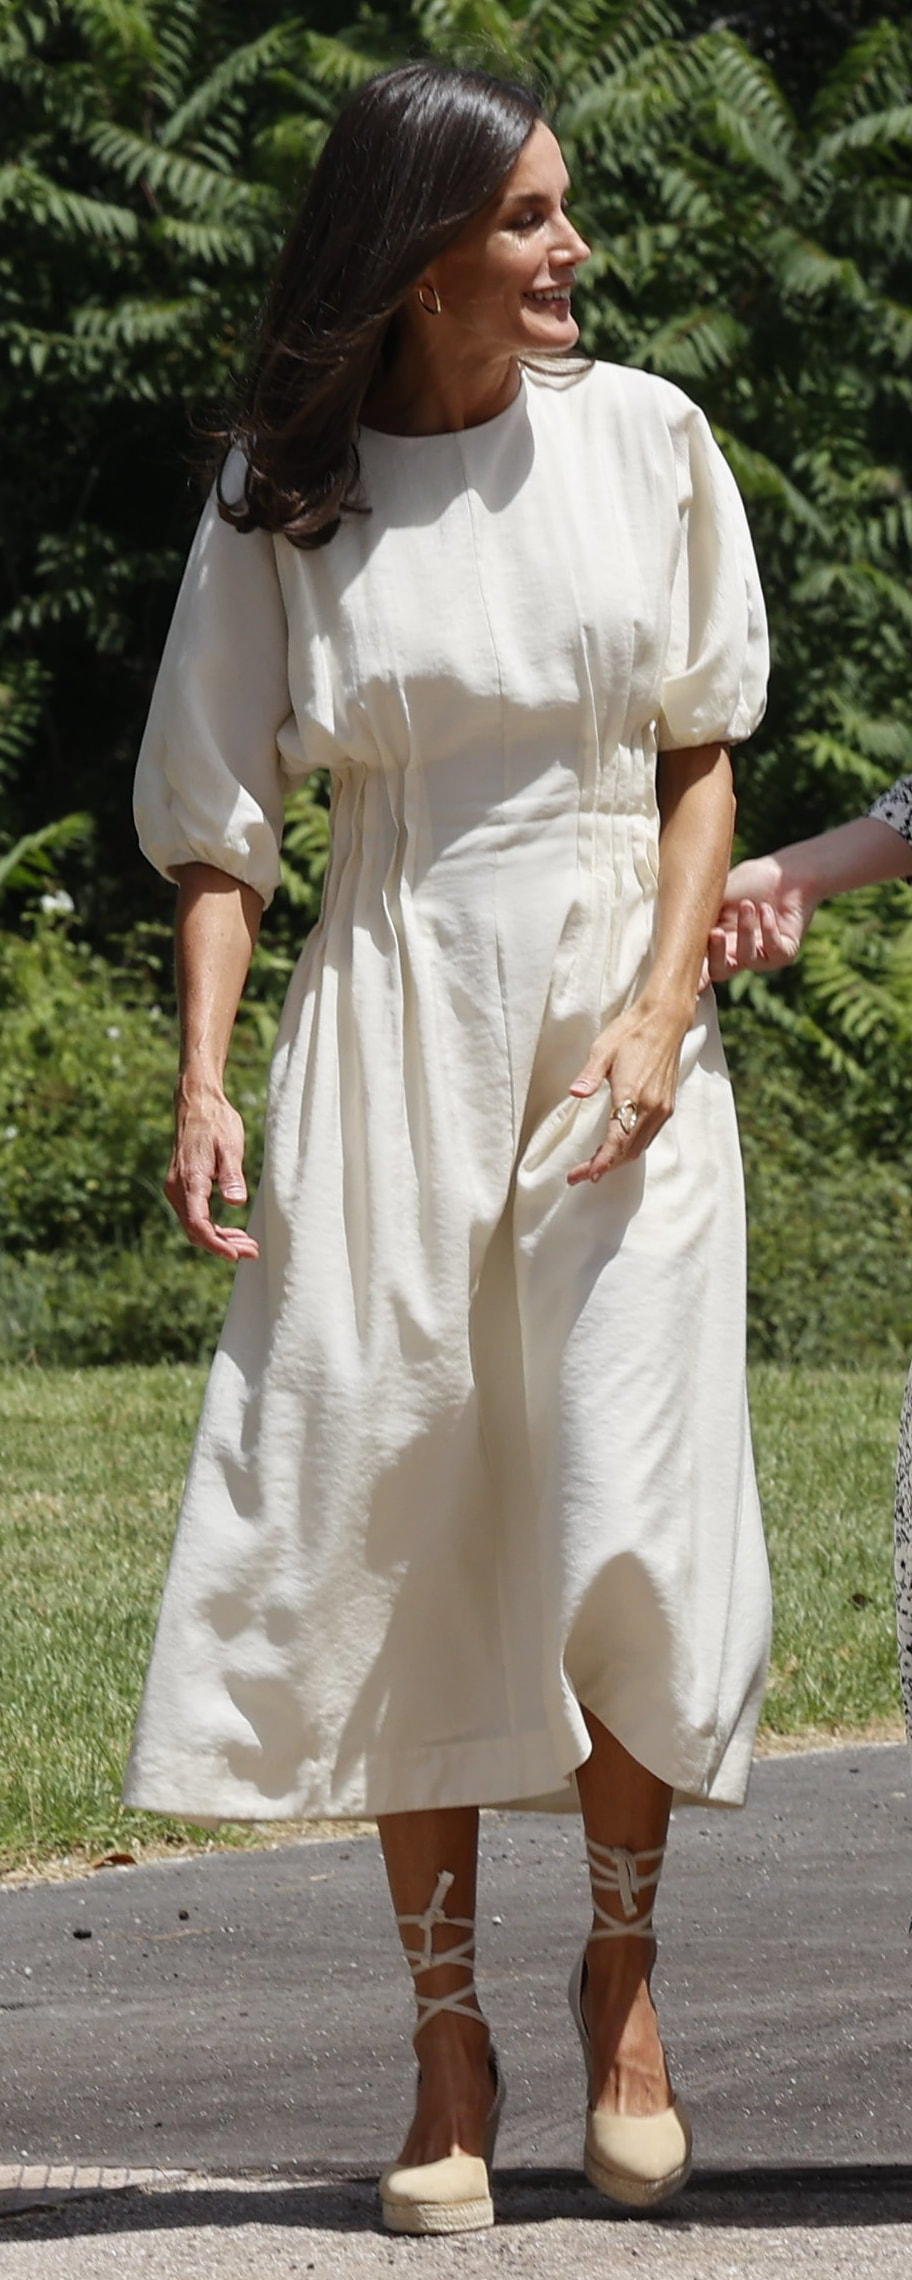 COS Natural Gathered Midi Dress​ as seen on Queen Letizia.